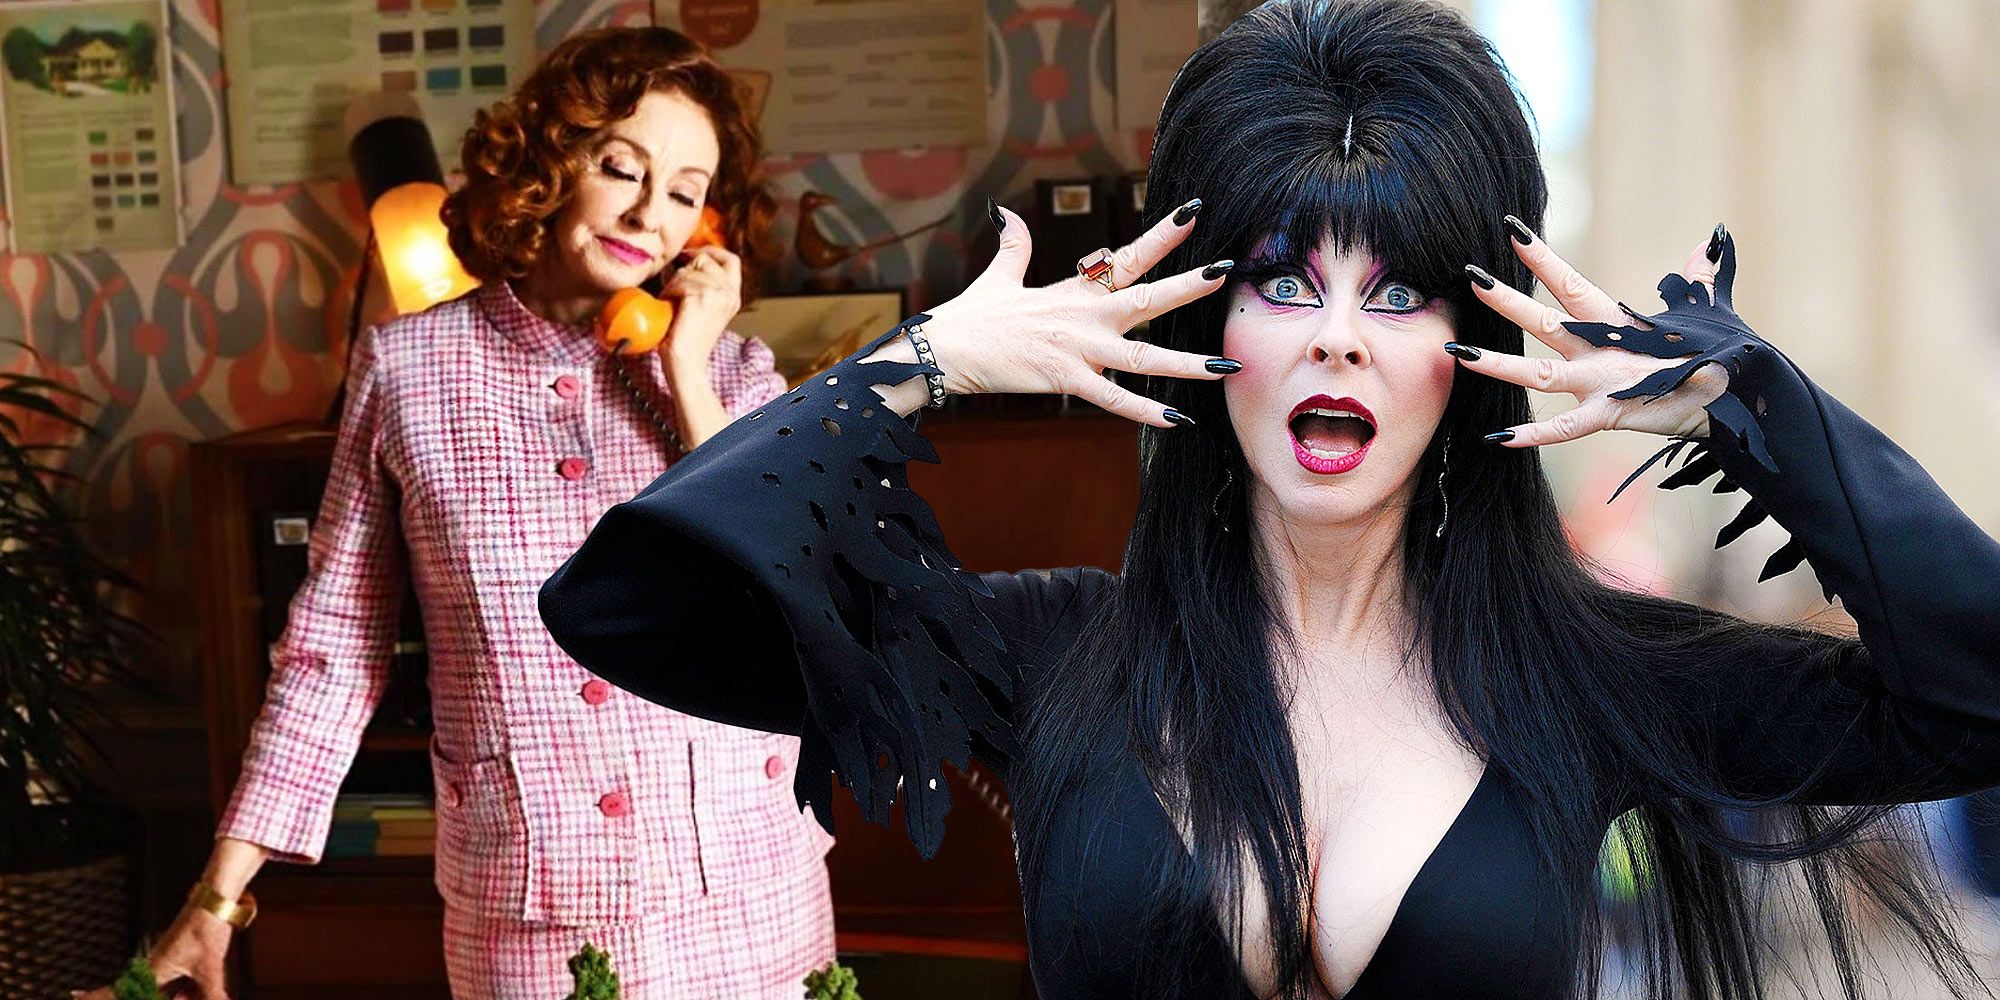 Elvira Super Straight Role In Rob Zombie's The Munsters